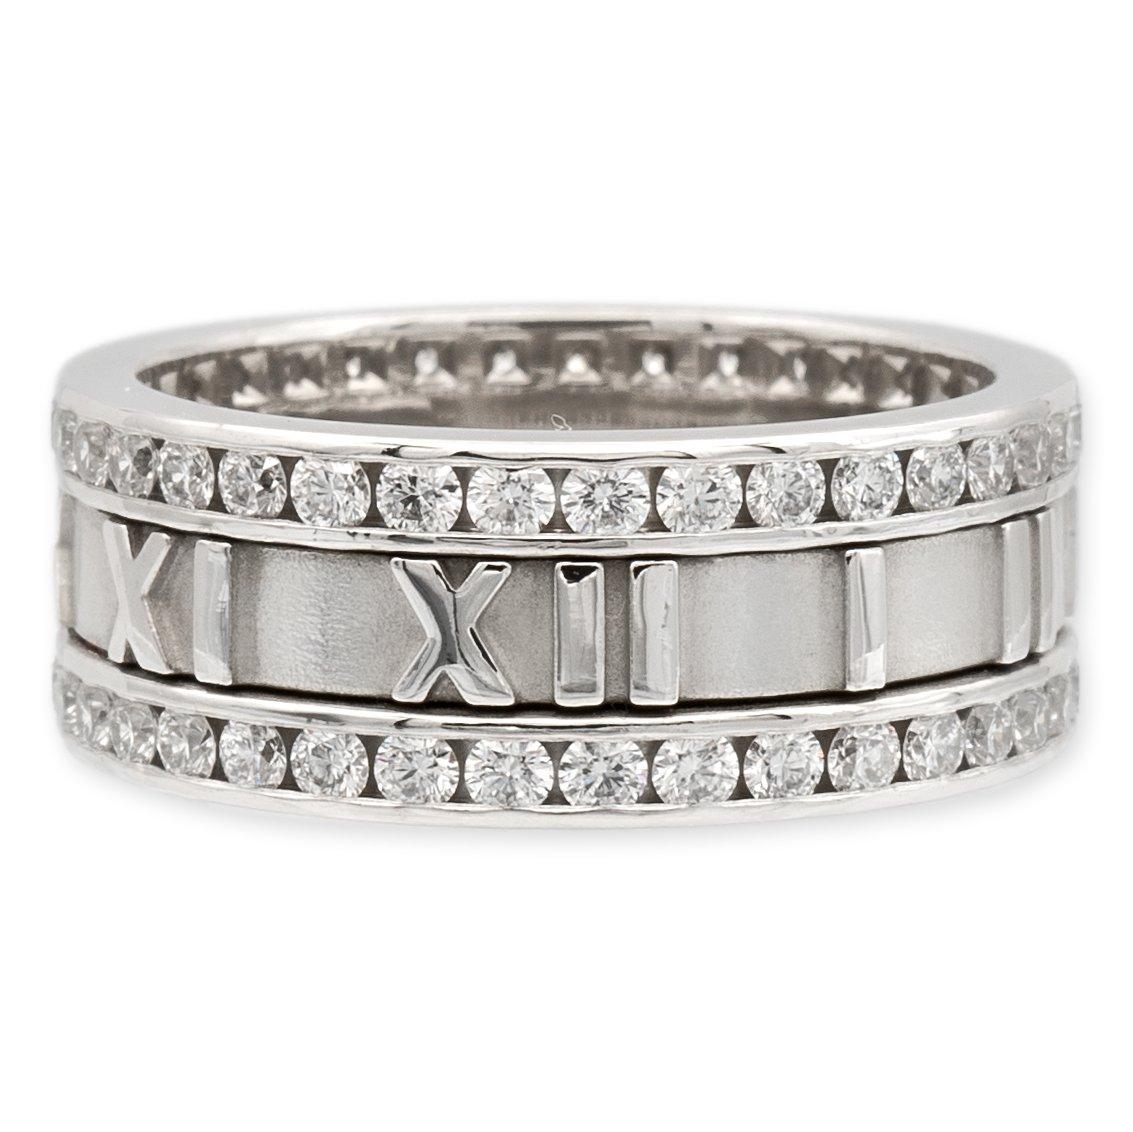 Vintage Tiffany & Co. band ring from the Atlas collection finely crafted in 18 karat white gold featuring 2 rows of round brilliant cut diamonds weighing 1.53 carats total weight G-H color and VVS-VS clarity range. The center features roman numerals